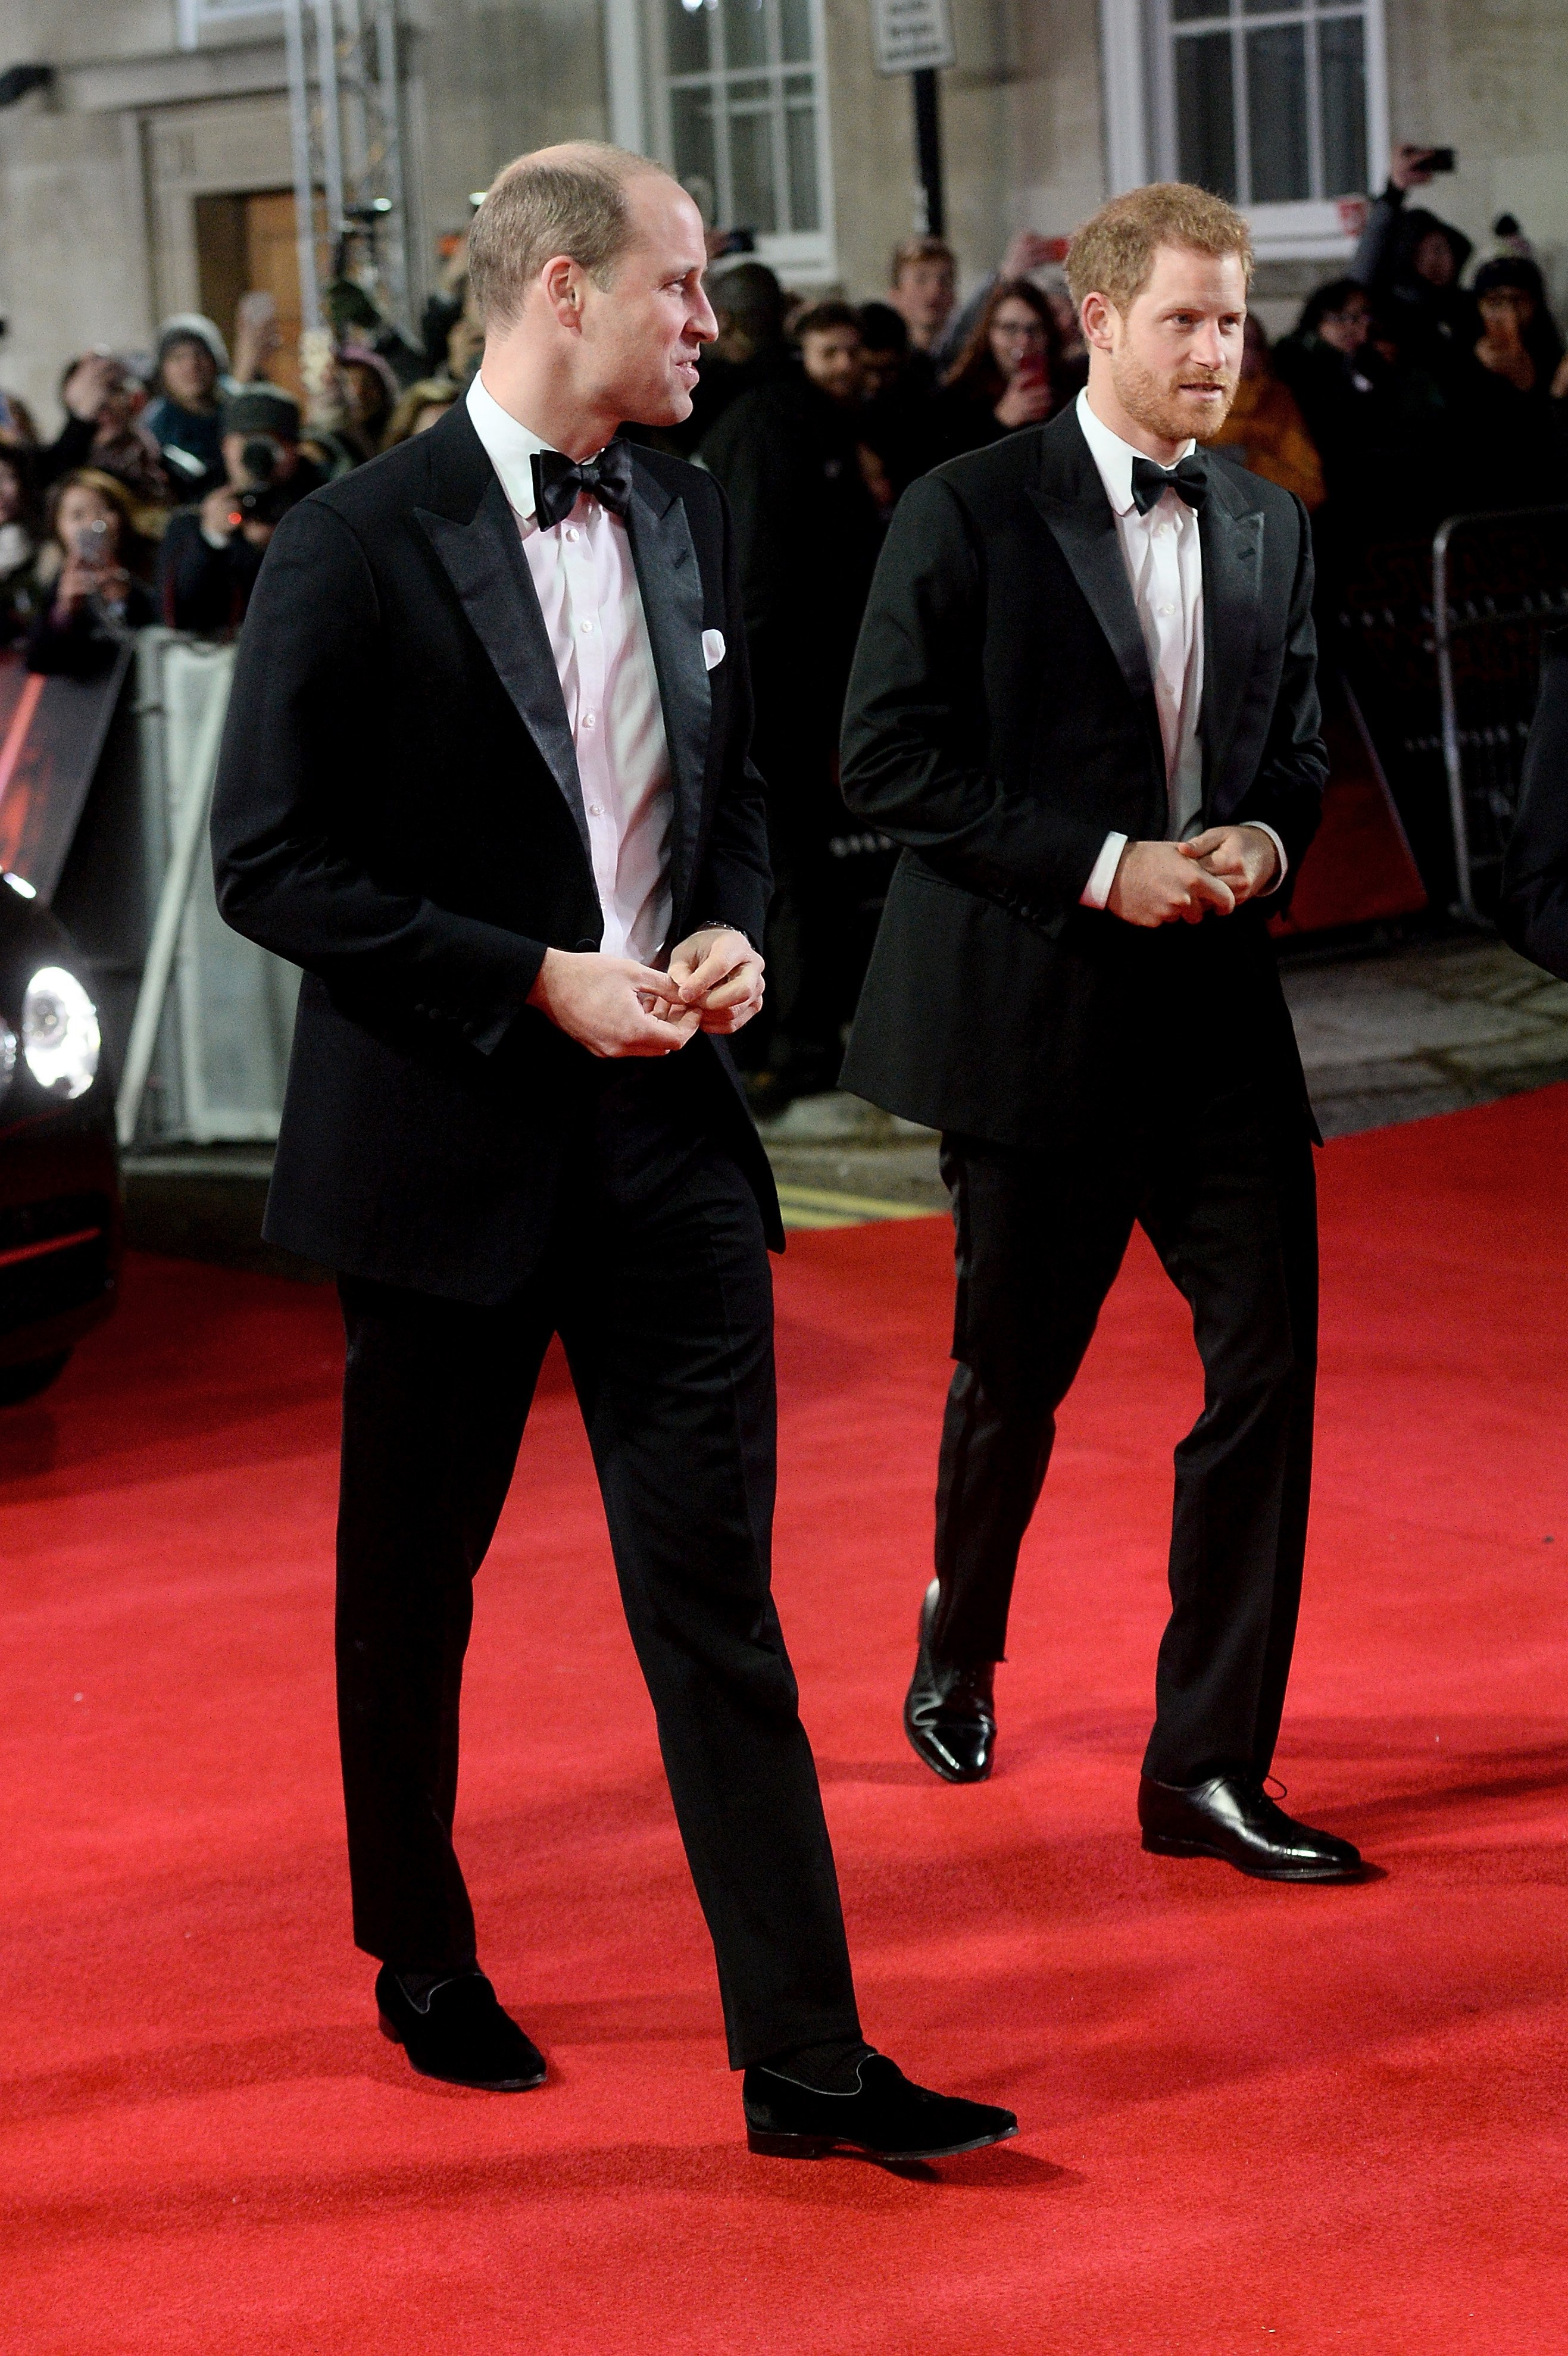 Prince William, Duke of Cambridge (L) and Prince Harry attend the European Premiere of 'Star Wars: The Last Jedi' at Royal Albert Hall on December 12, 2017 in London, England. | Source: Getty Images